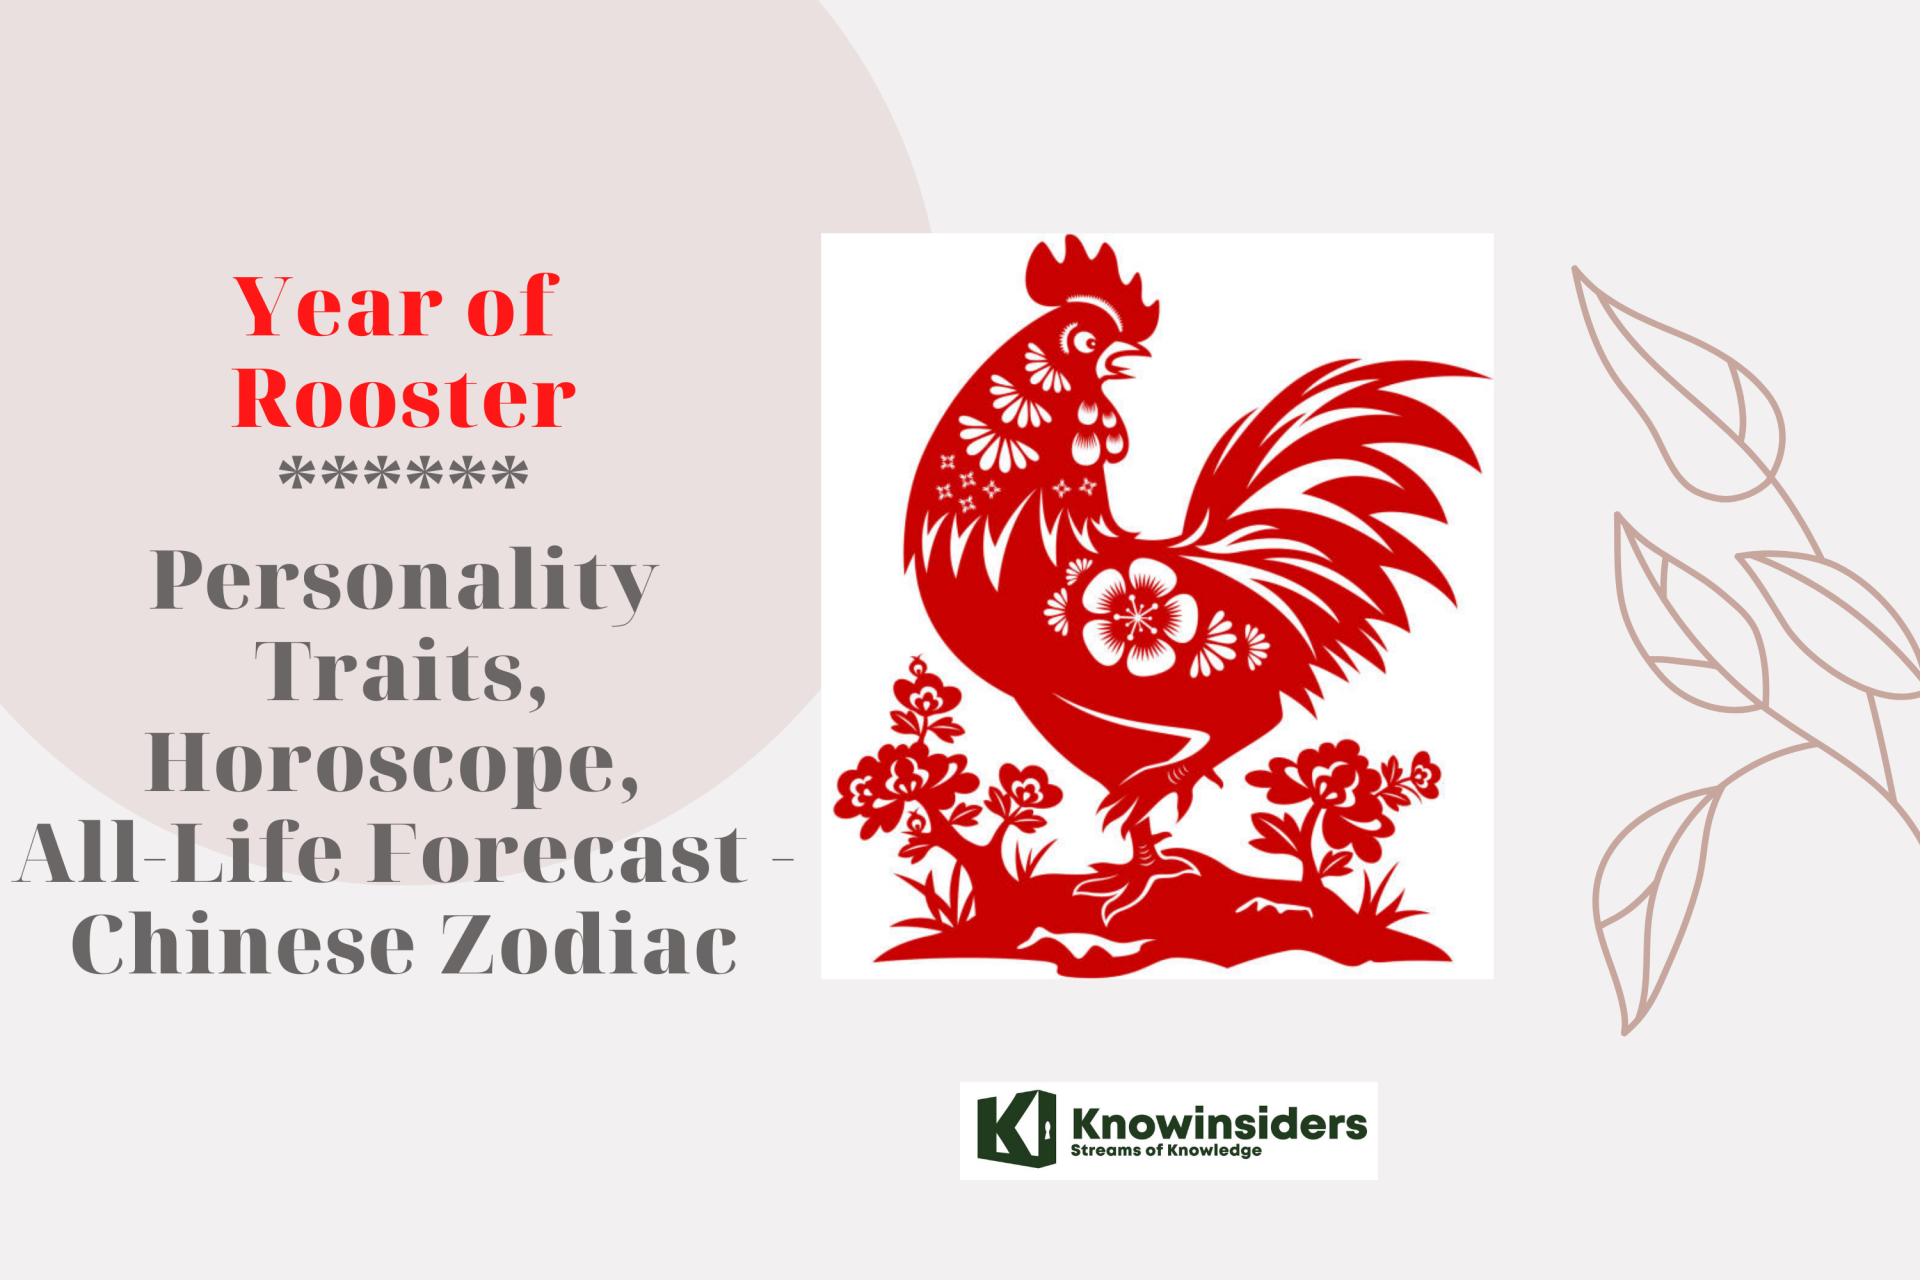 Year of Rooster: Personality Traits, Horoscope, All-Life Forecast - Chinese Zodiac